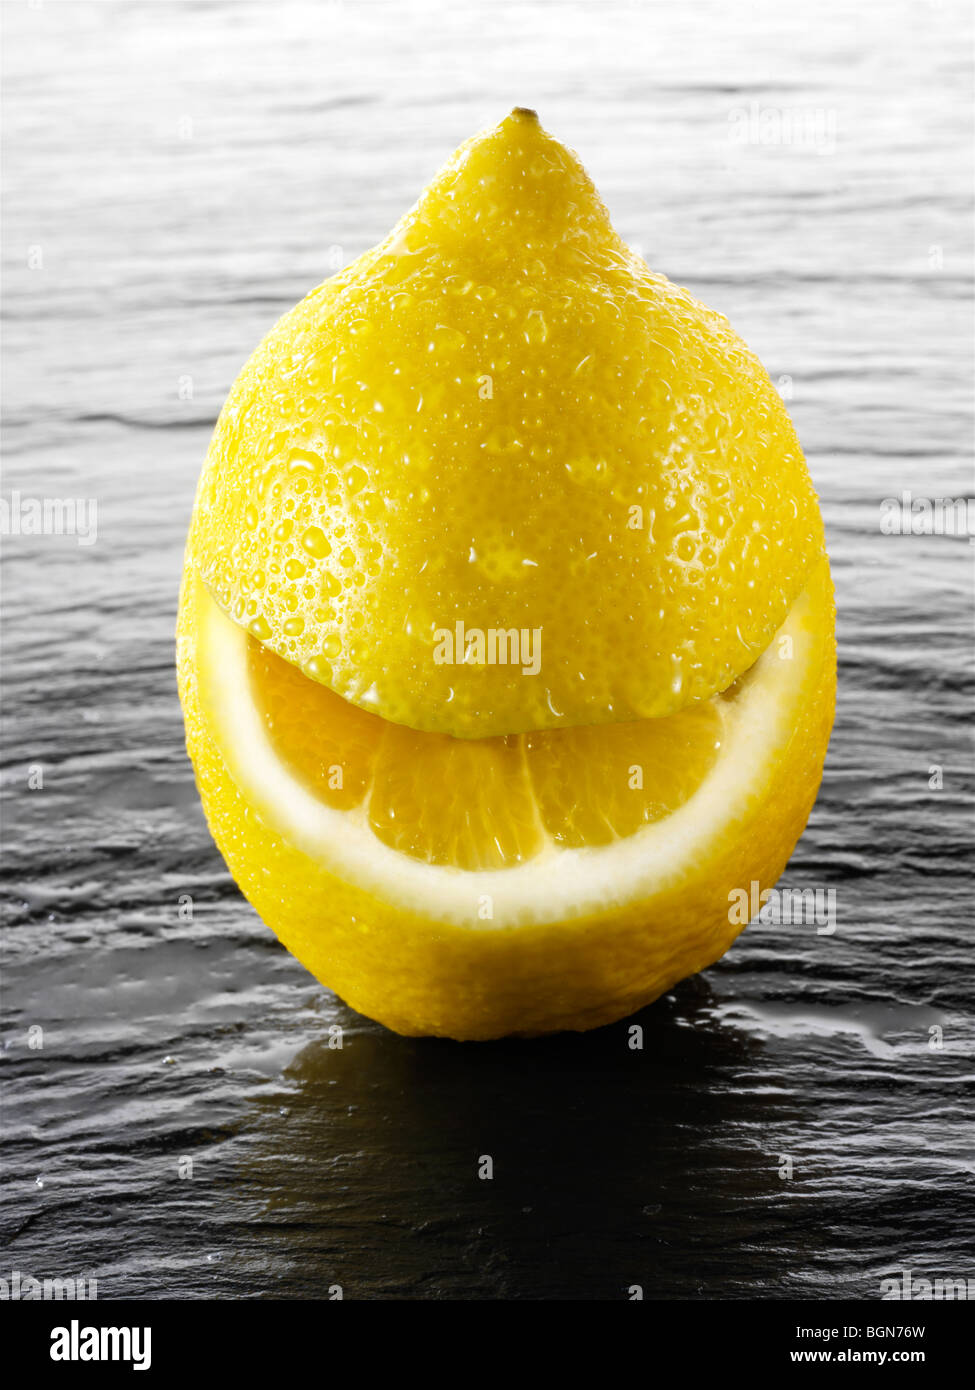 Wole lemon with a smiley face Stock Photo